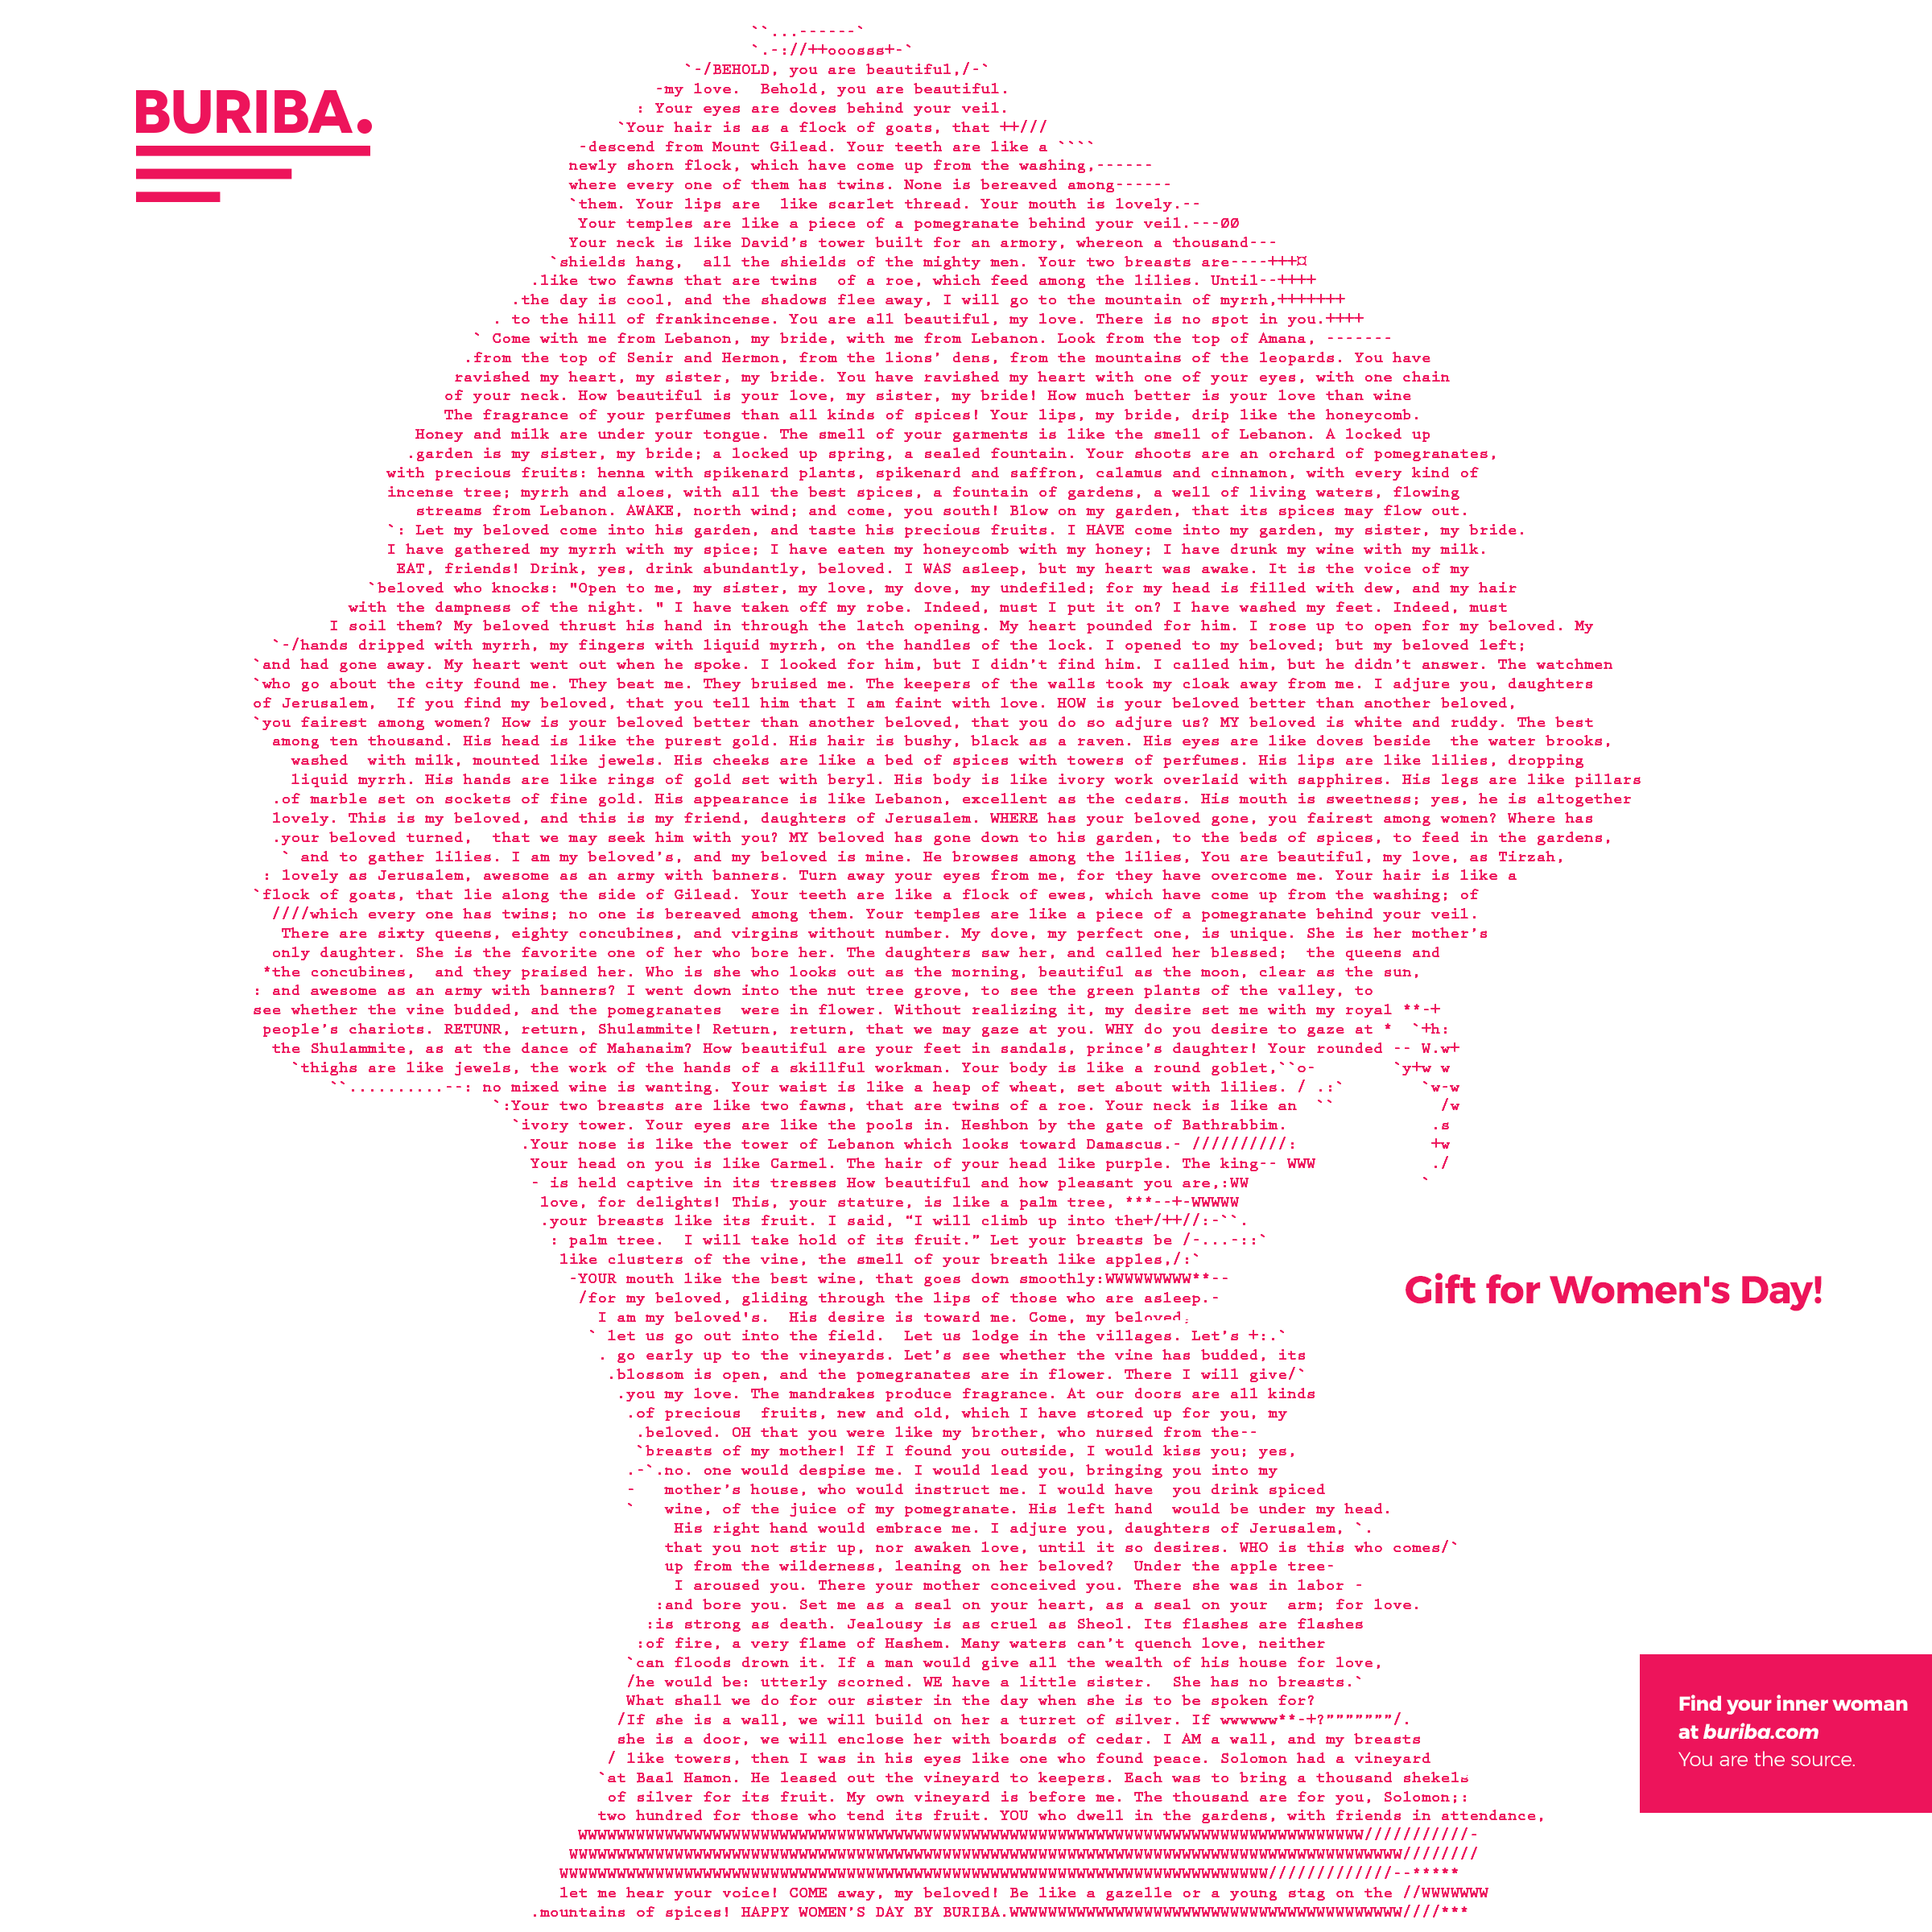 Silhouette of Woman made of Song of Songs appears in BURIBA website source code